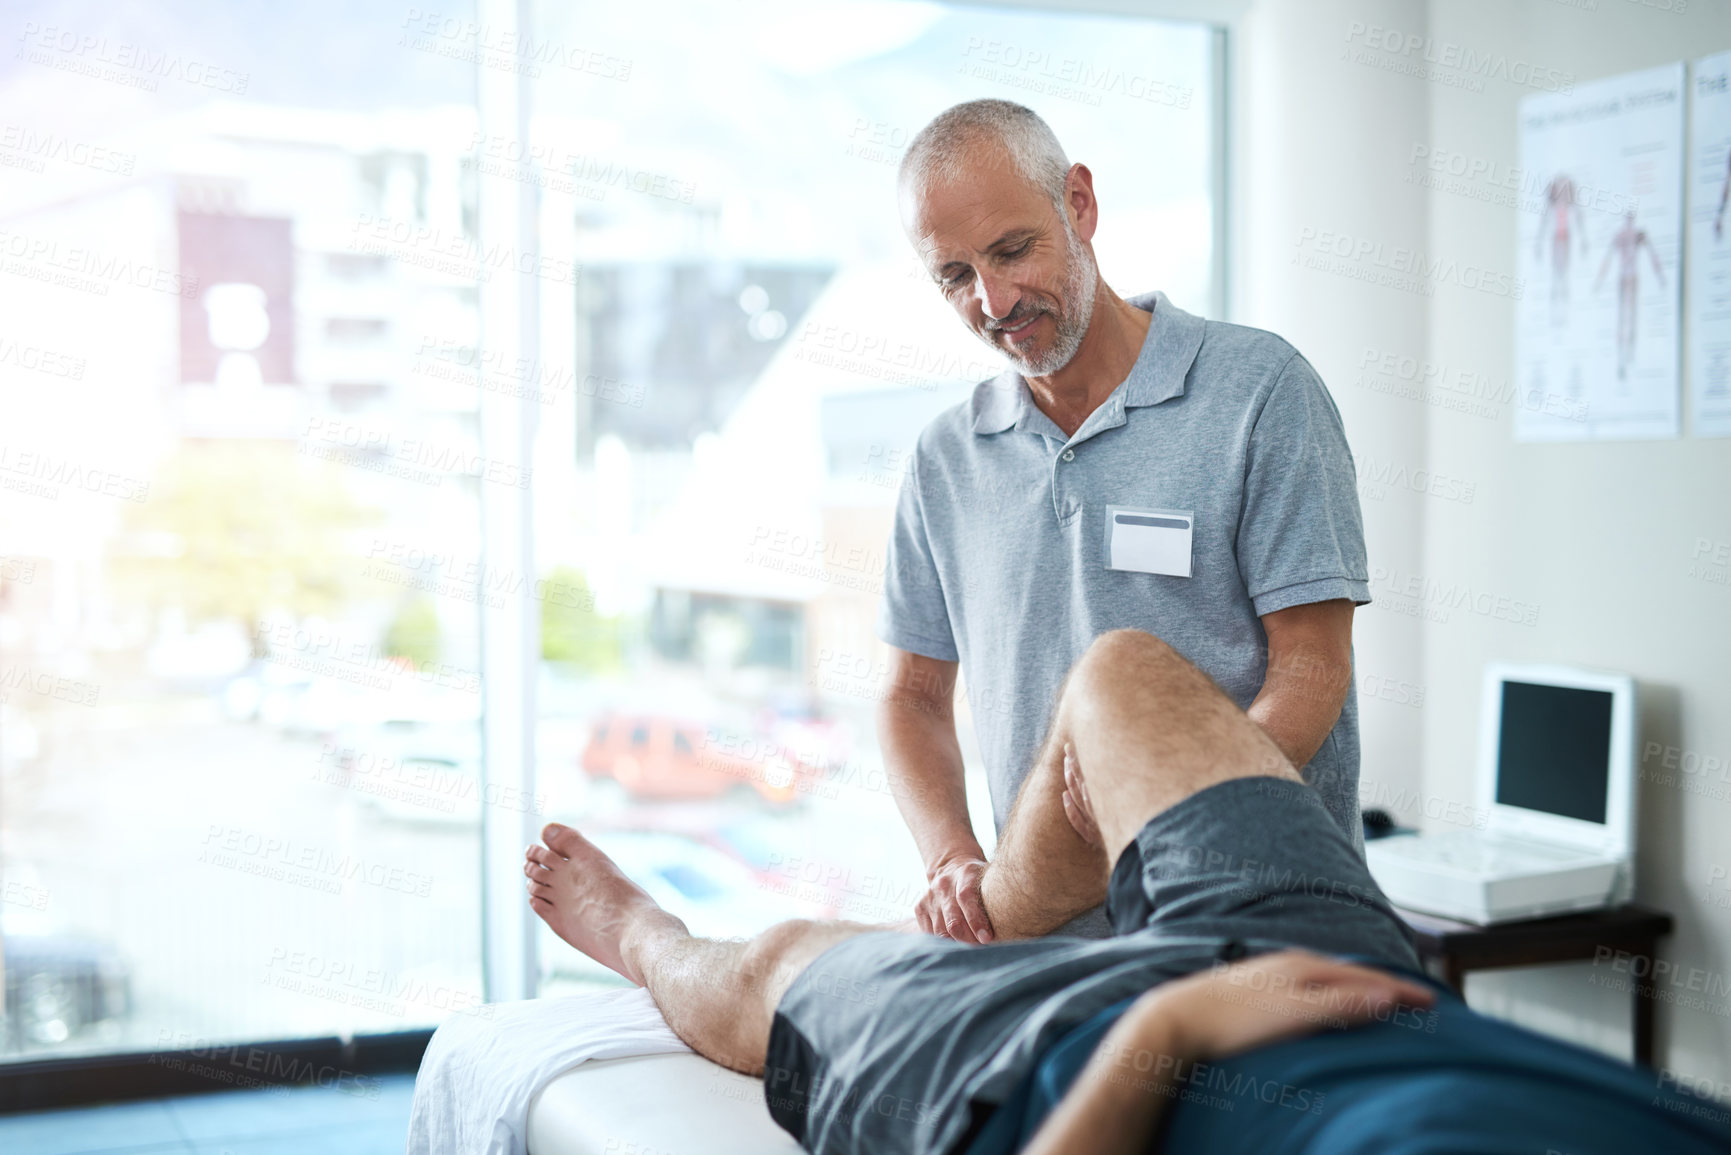 Buy stock photo Physiotherapy, rehabilitation and knee pain with a man consultant working with a patient in recovery from injury. Medical, healthcare and anatomy with a male therapist consulting or helping a client